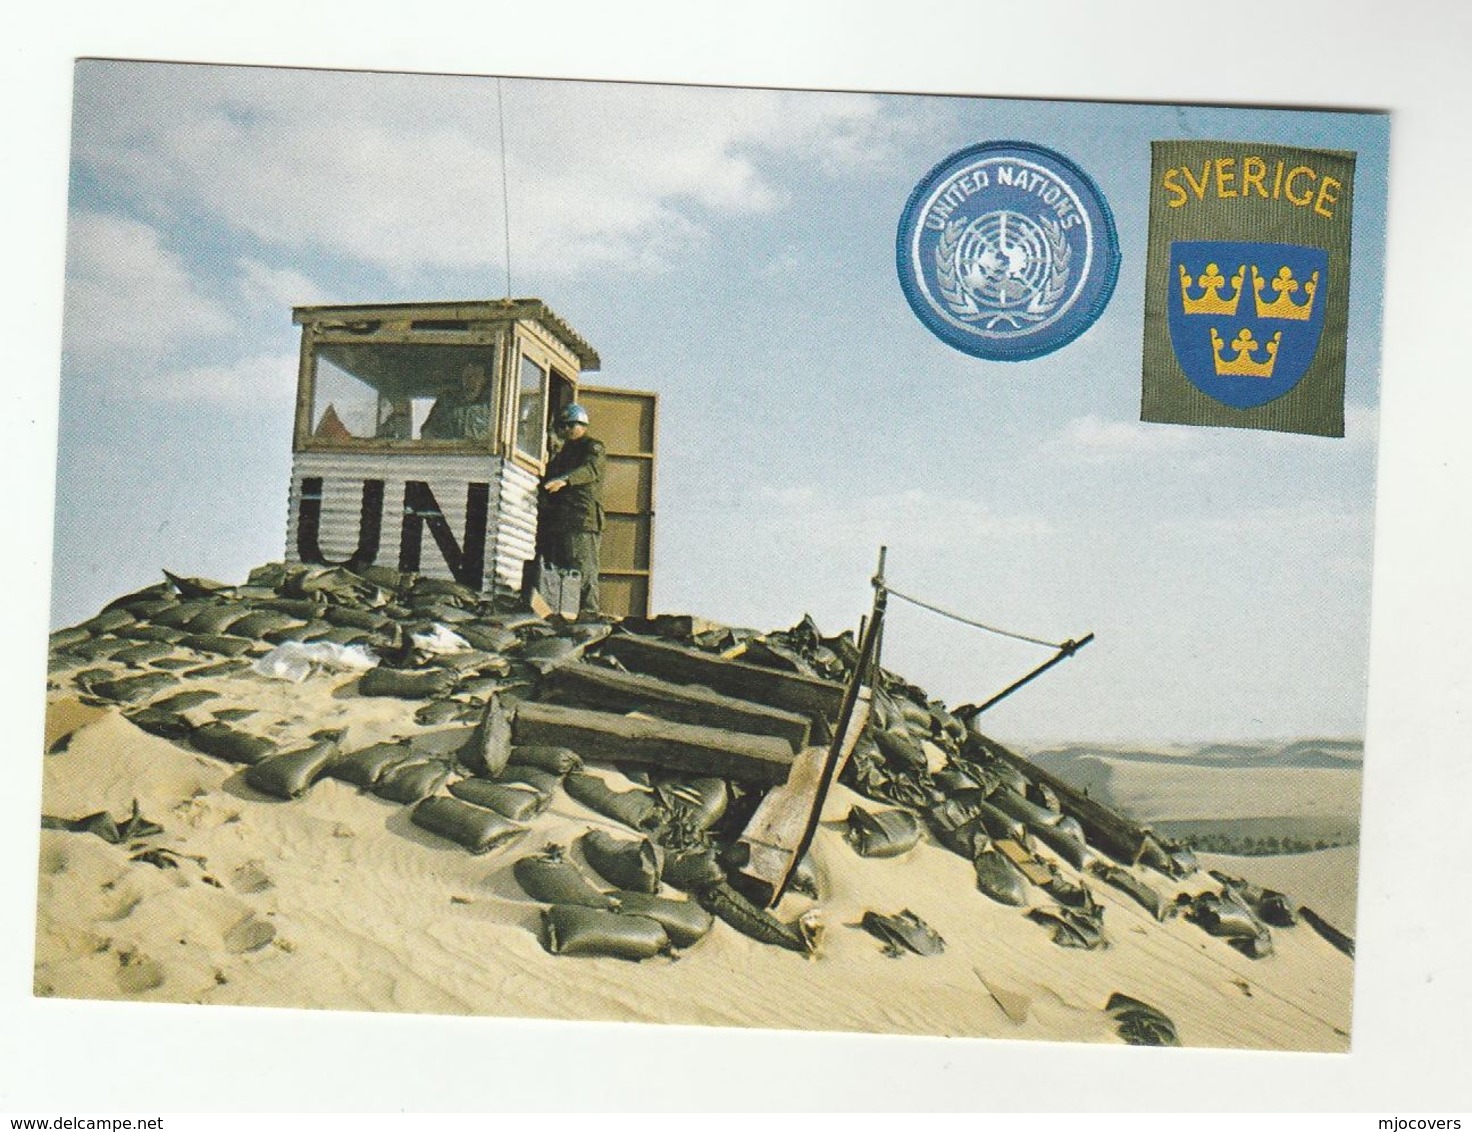 SWEDISH Military UN FORCES Postcard Soldiers UN Desert Observation Post 'On The Post For Peace' United Nations Sweden - Manoeuvres